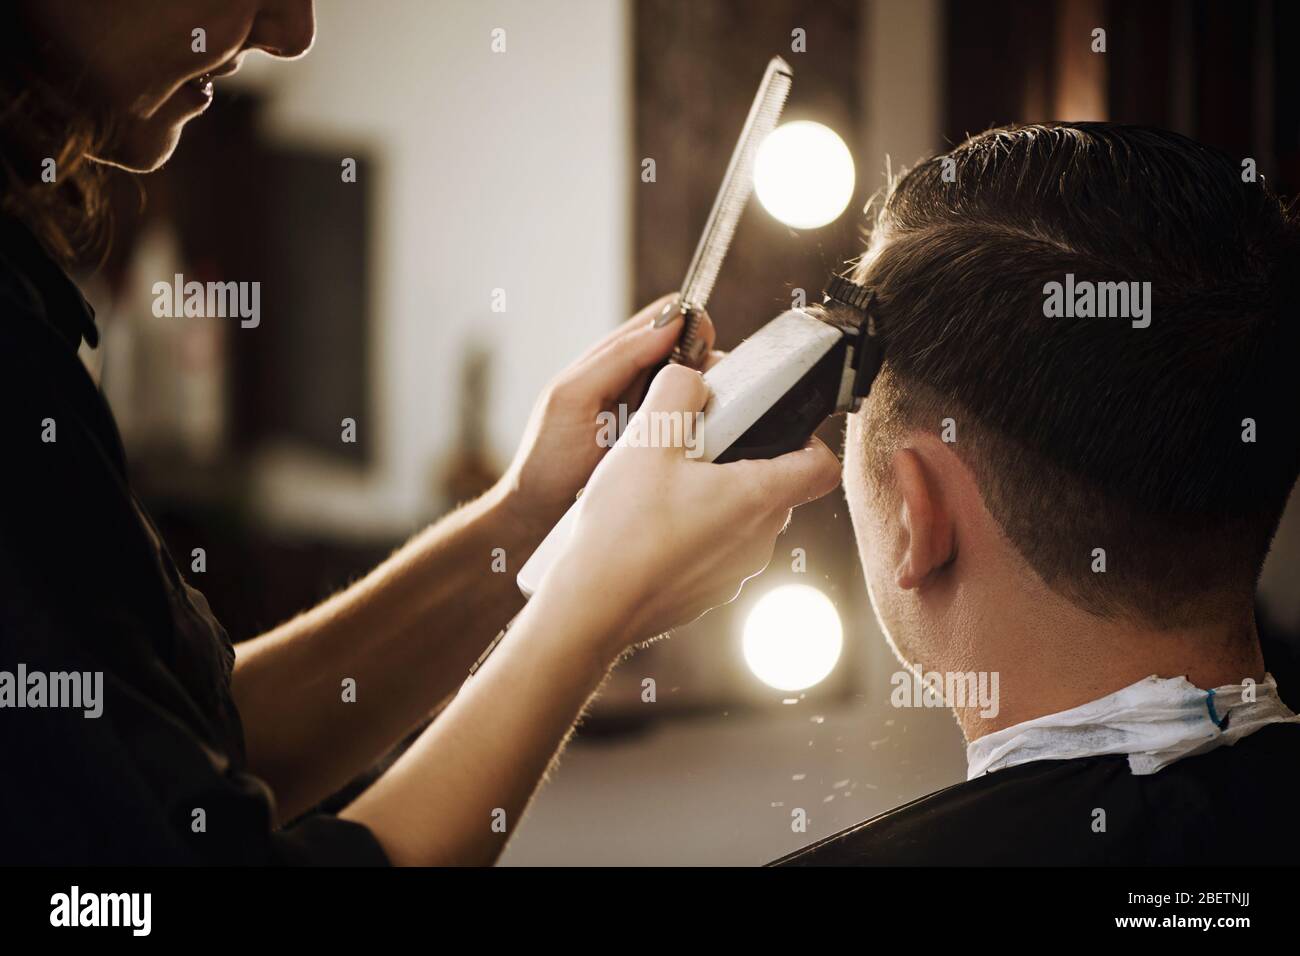 Close up view of hairdresser cutting hair of man in barbershop. Stock Photo